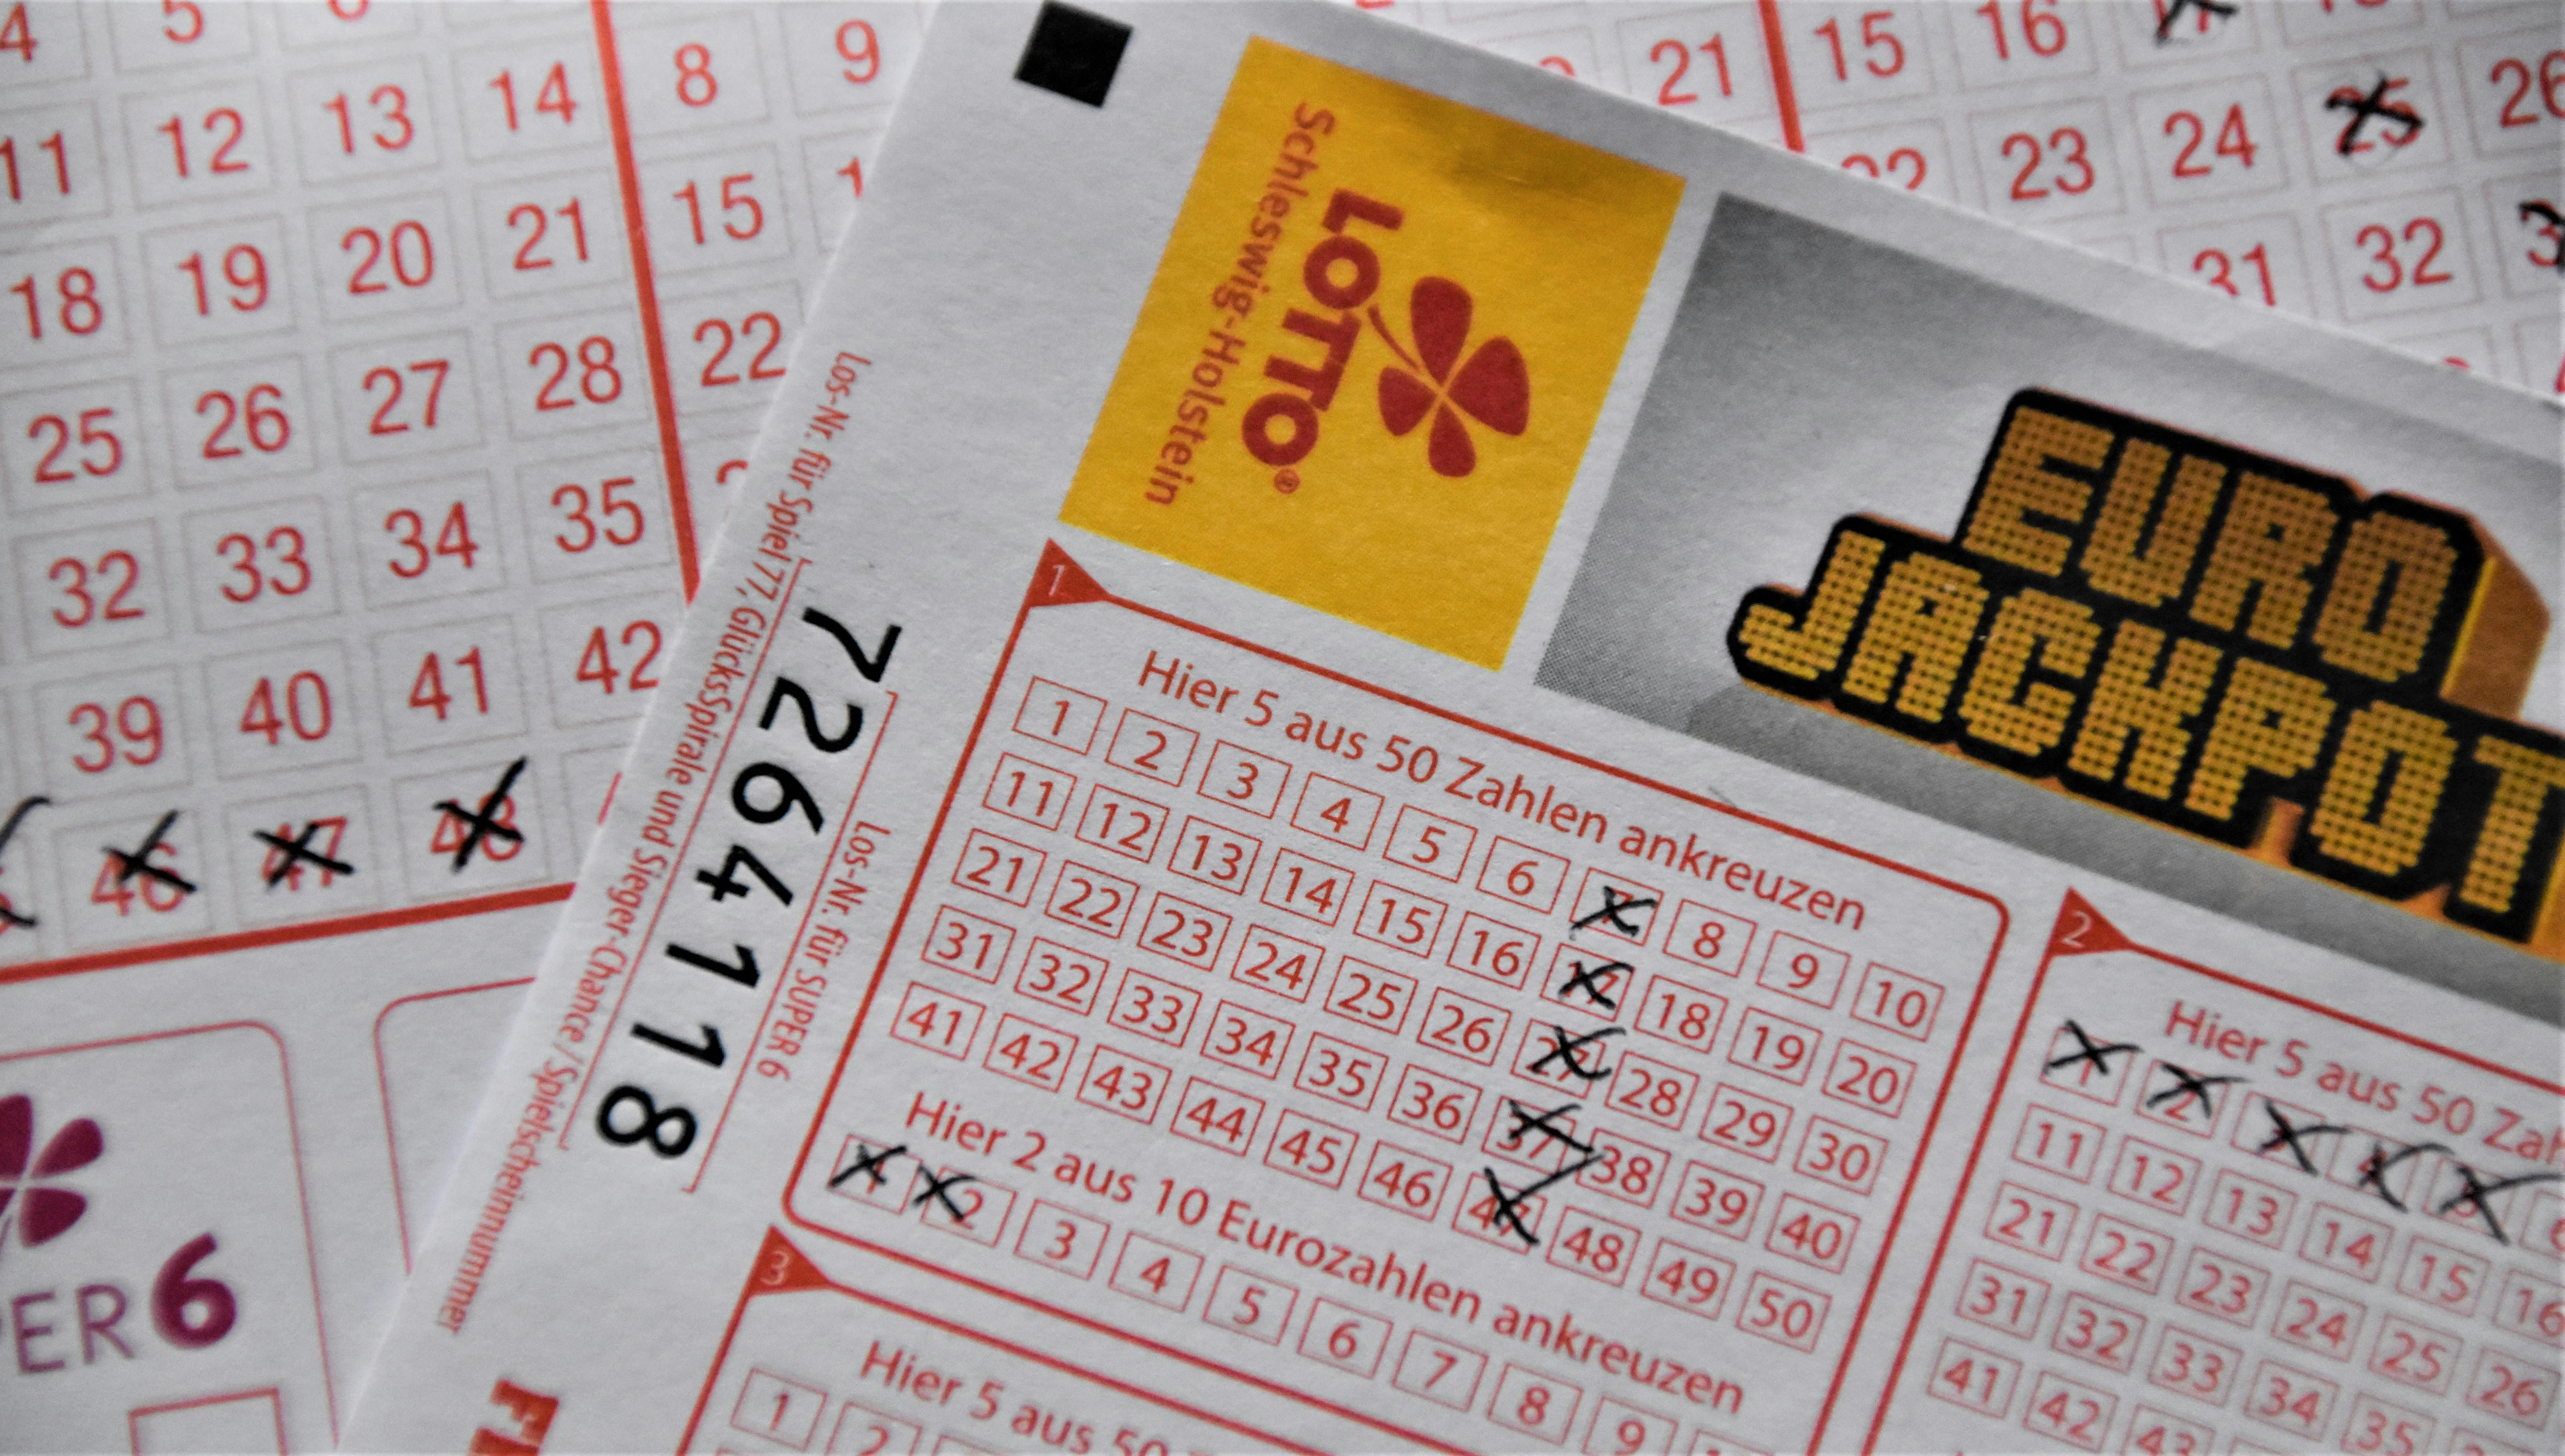 Lottery tickets | Source: Pexels